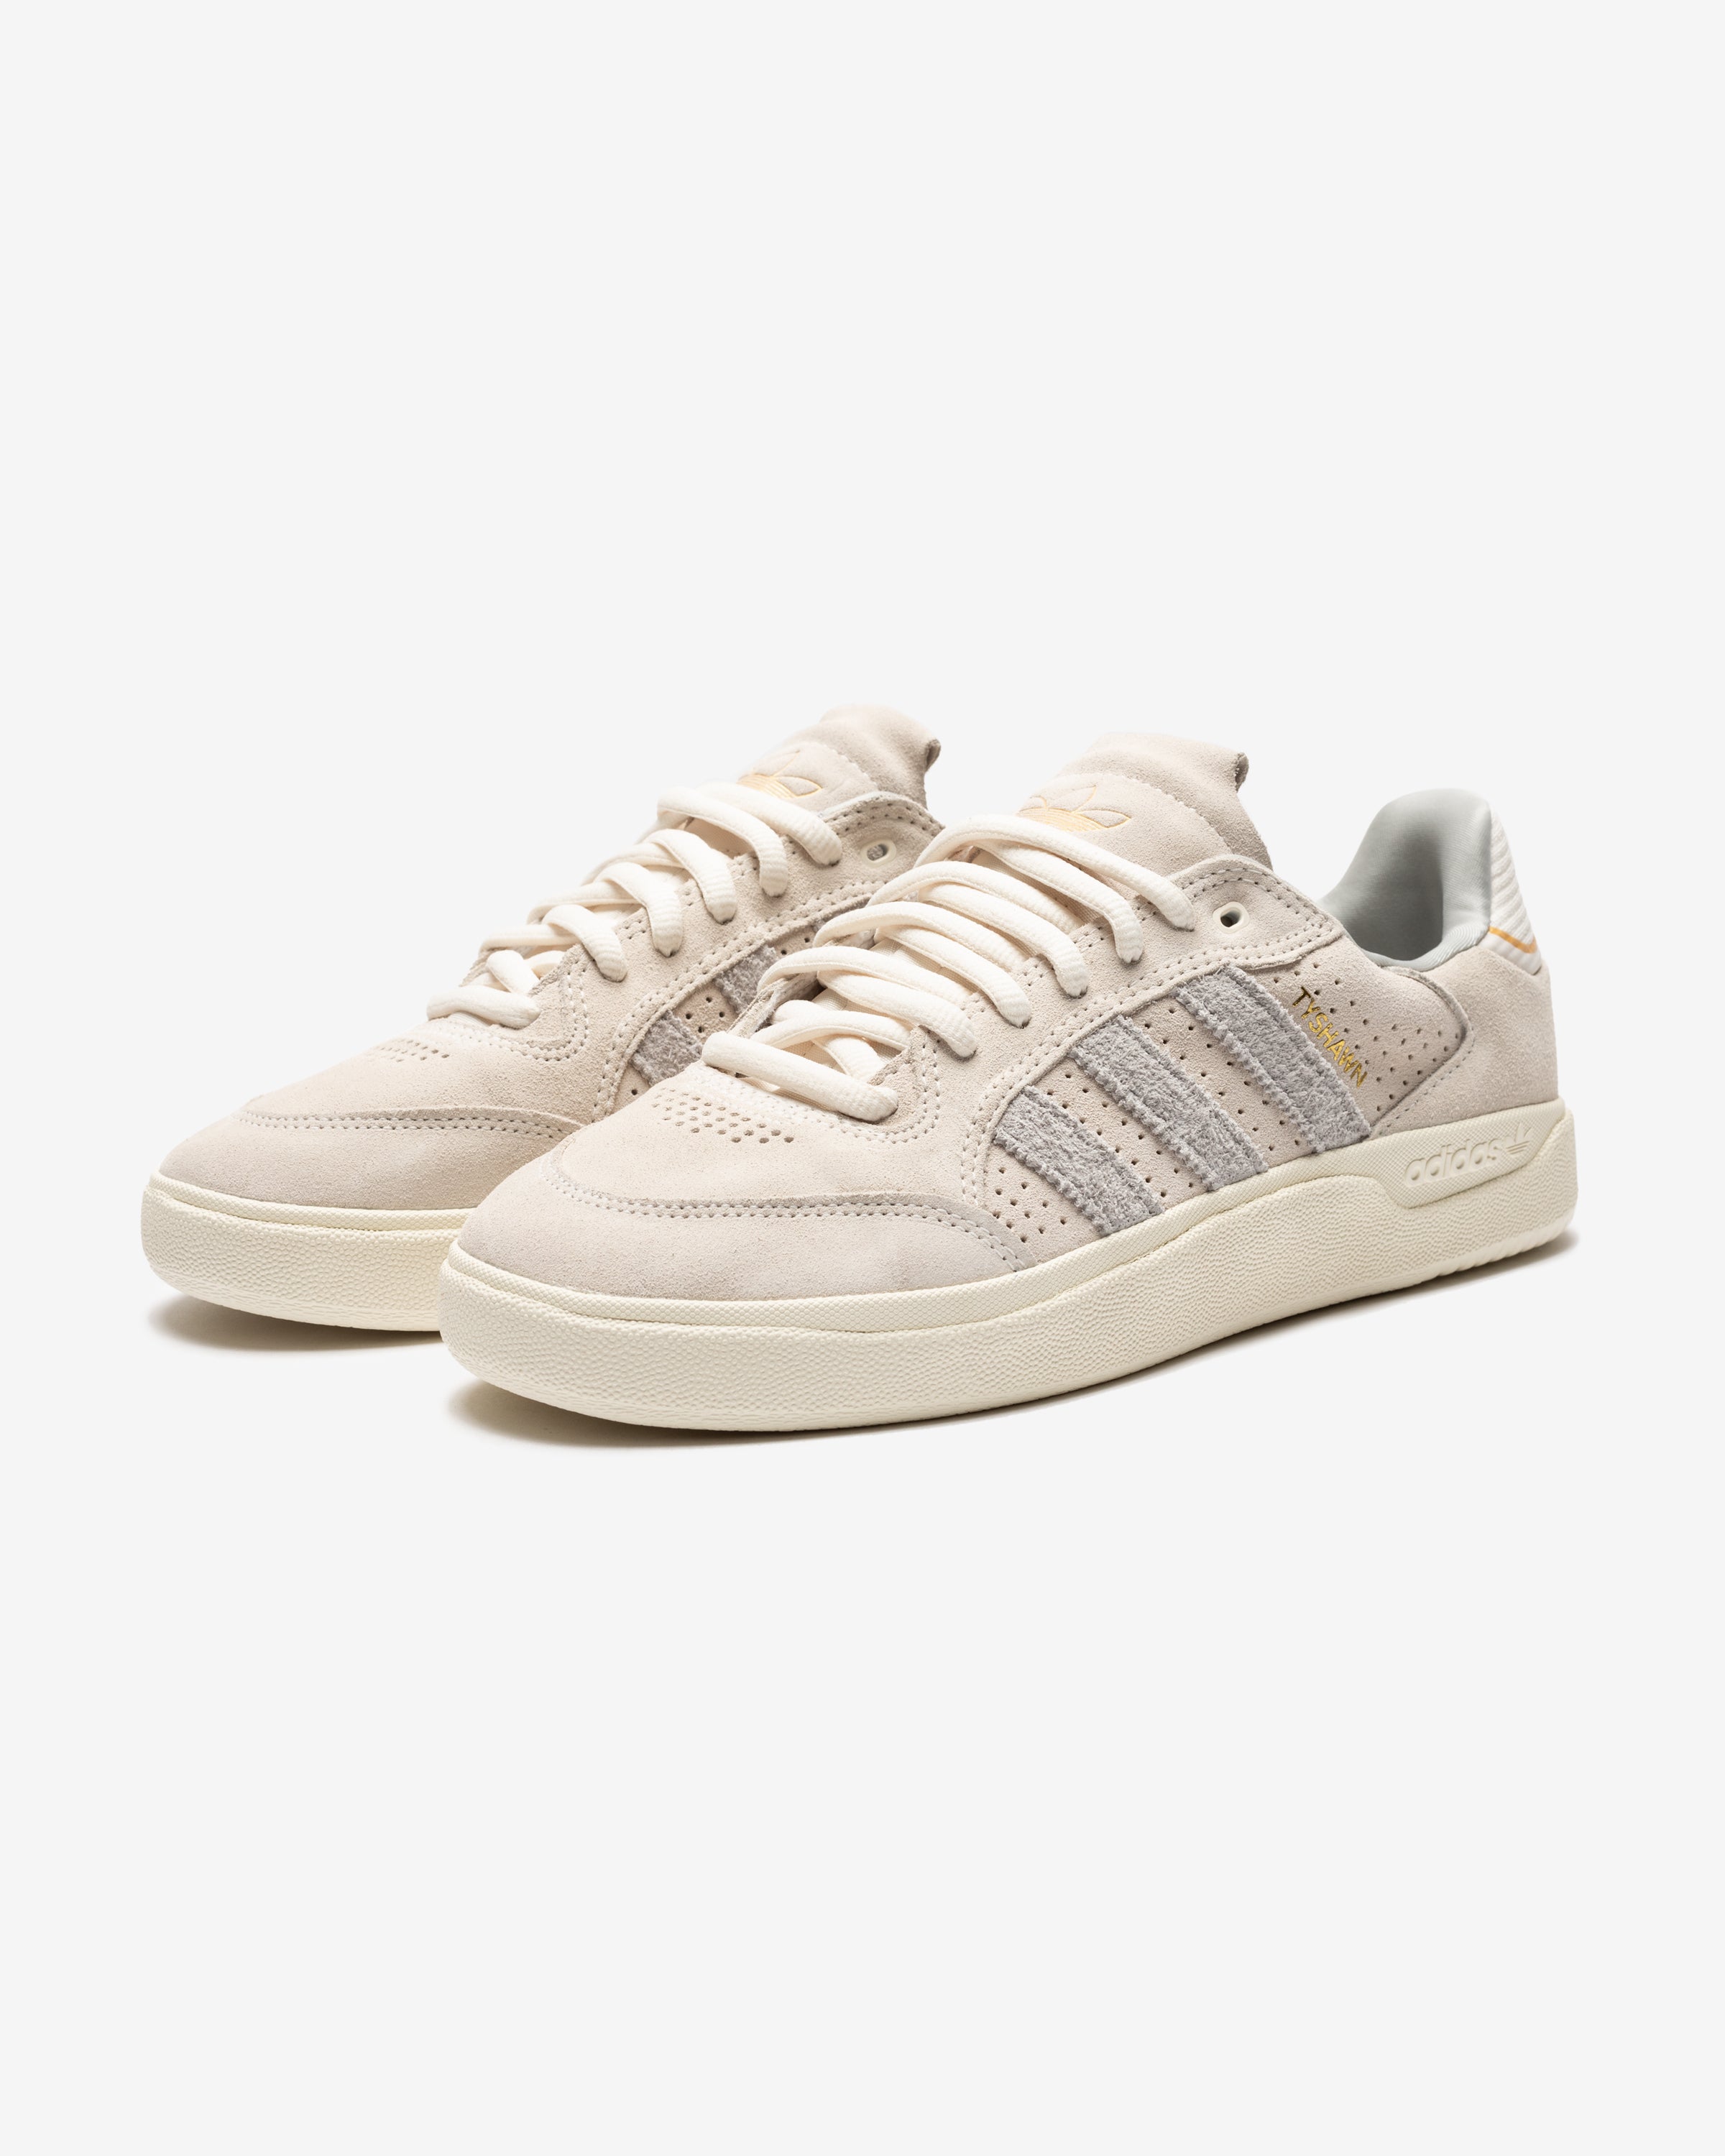 ADIDAS TYSHAWN LOW - GREONE Undefeated